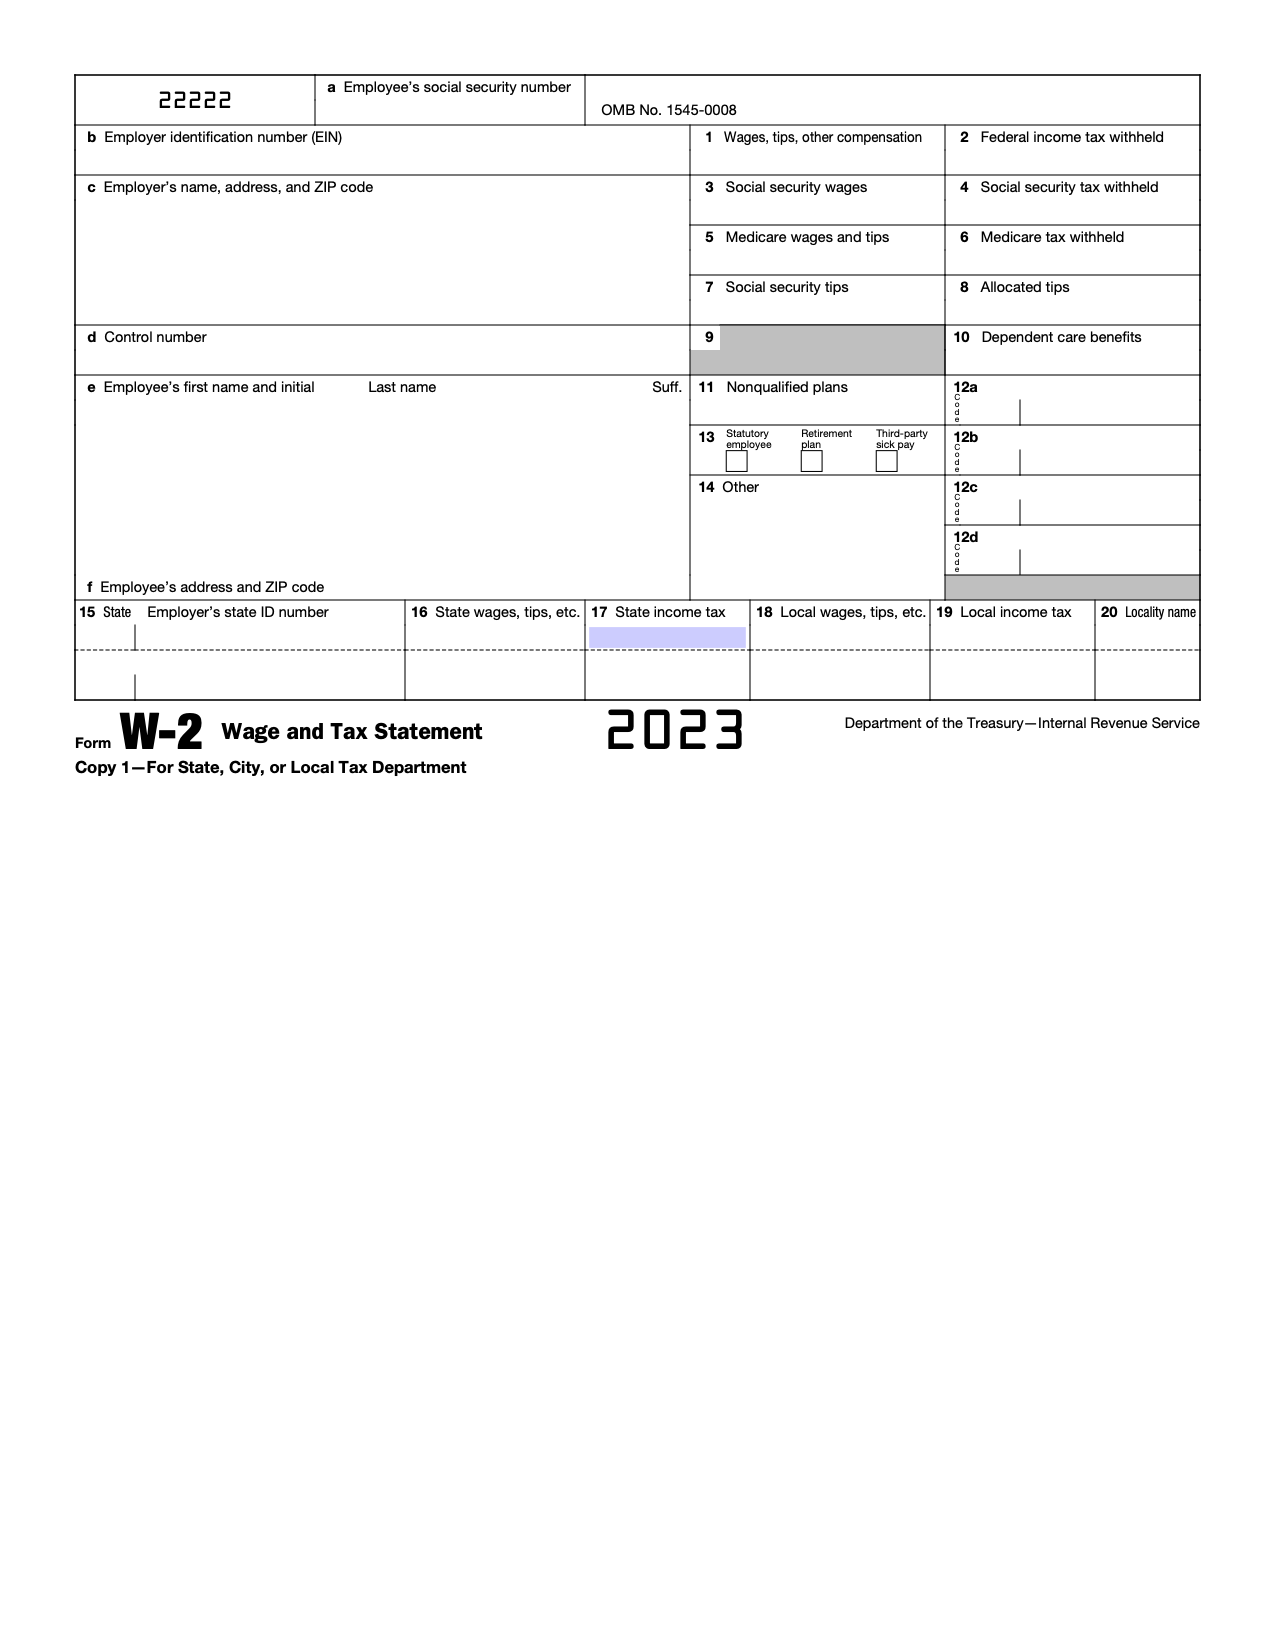 Free Irs Form W-2 | Wage And Tax Statement - Pdf – Eforms in Irs W2 Fillable Form